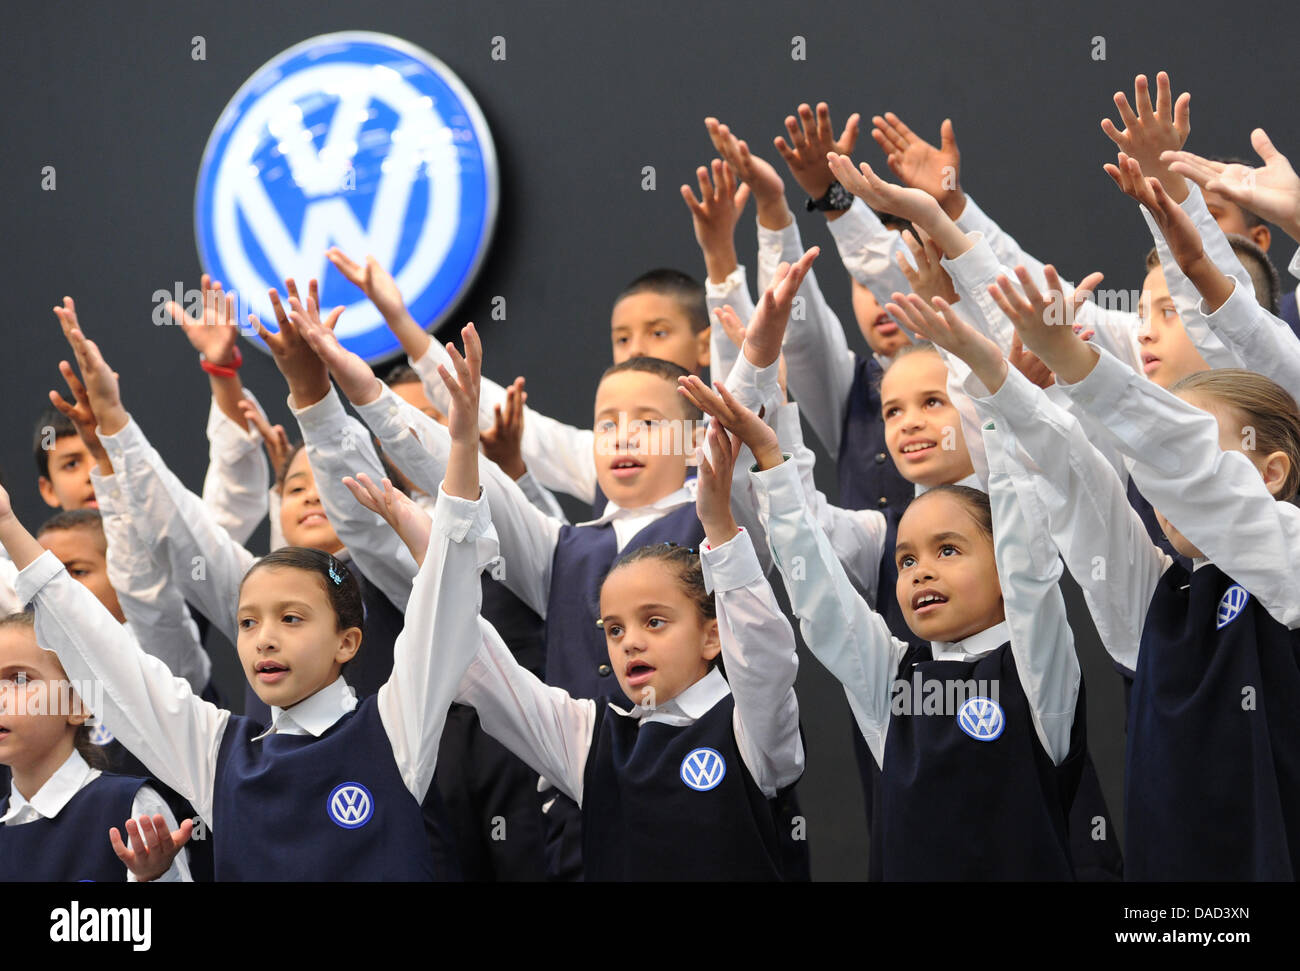 A group of children, wearing school uniforms featuring the VW car logo,  cheer and smiles during a visit of Lower Saxony's Premier, David  McAllister, to the Volkswagen plant Anchieta in Sao Bernardo